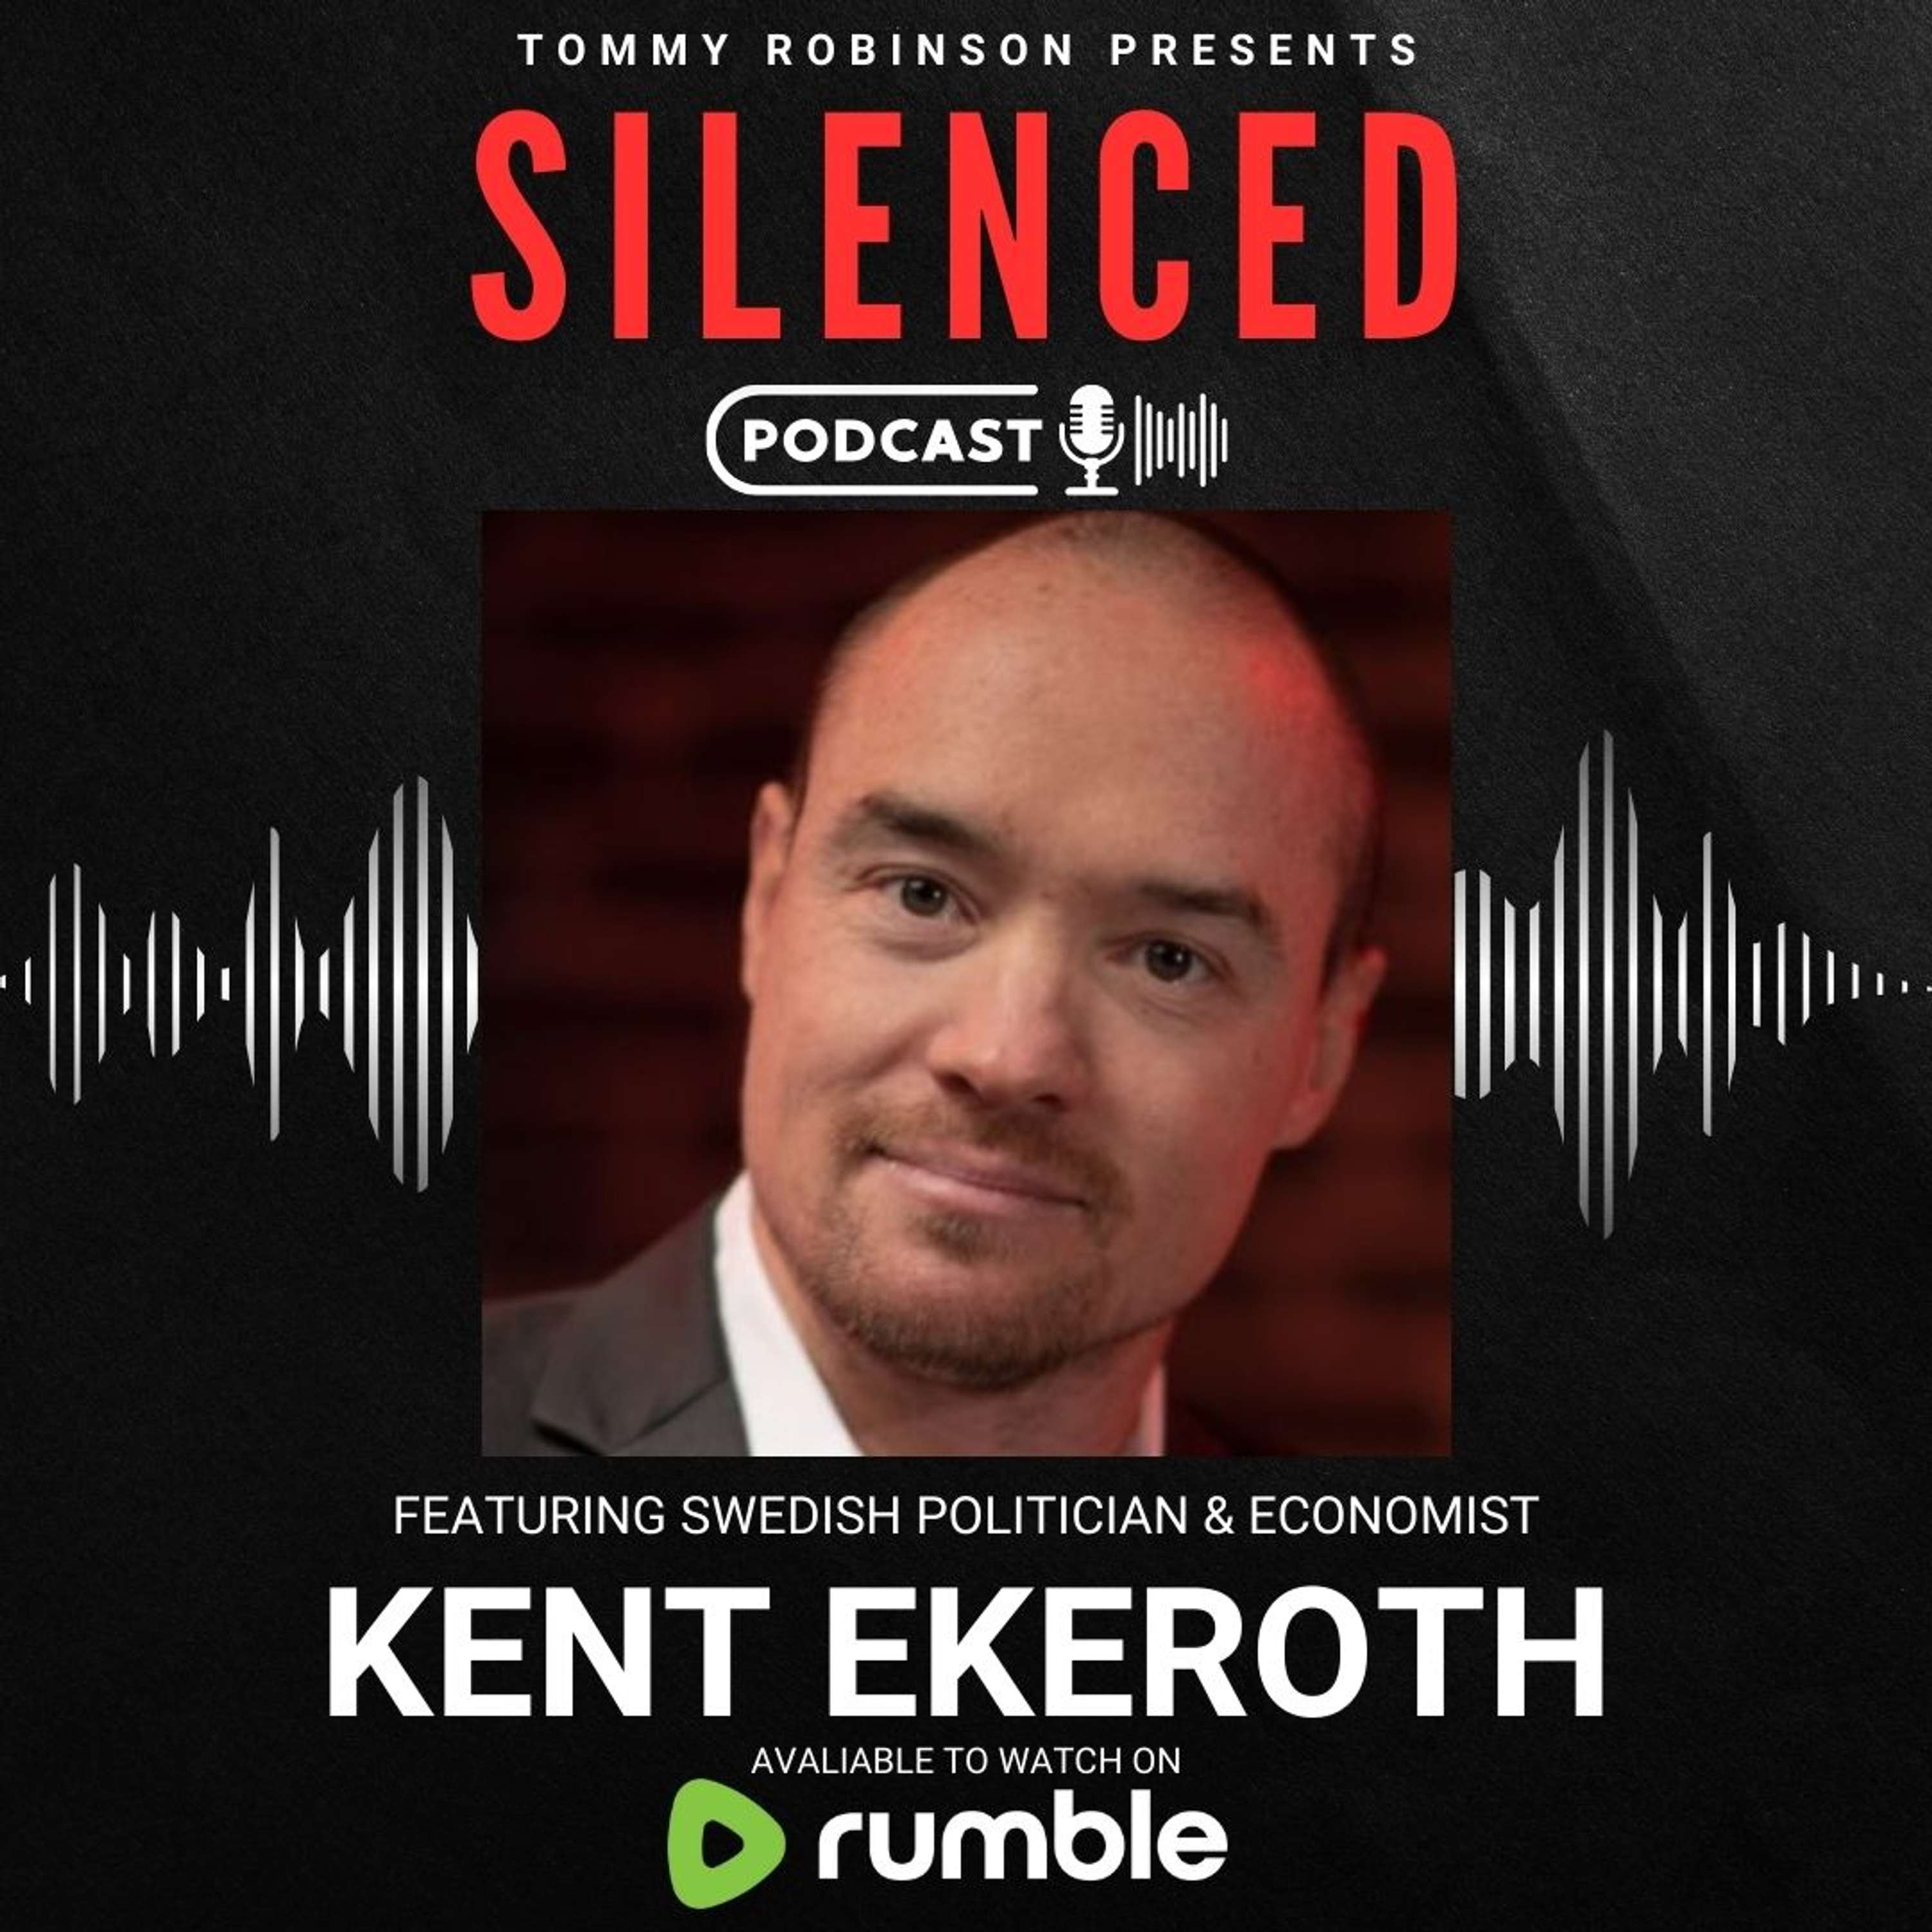 Episode 33 - SILENCED with Tommy Robinson - Kent Ekeroth